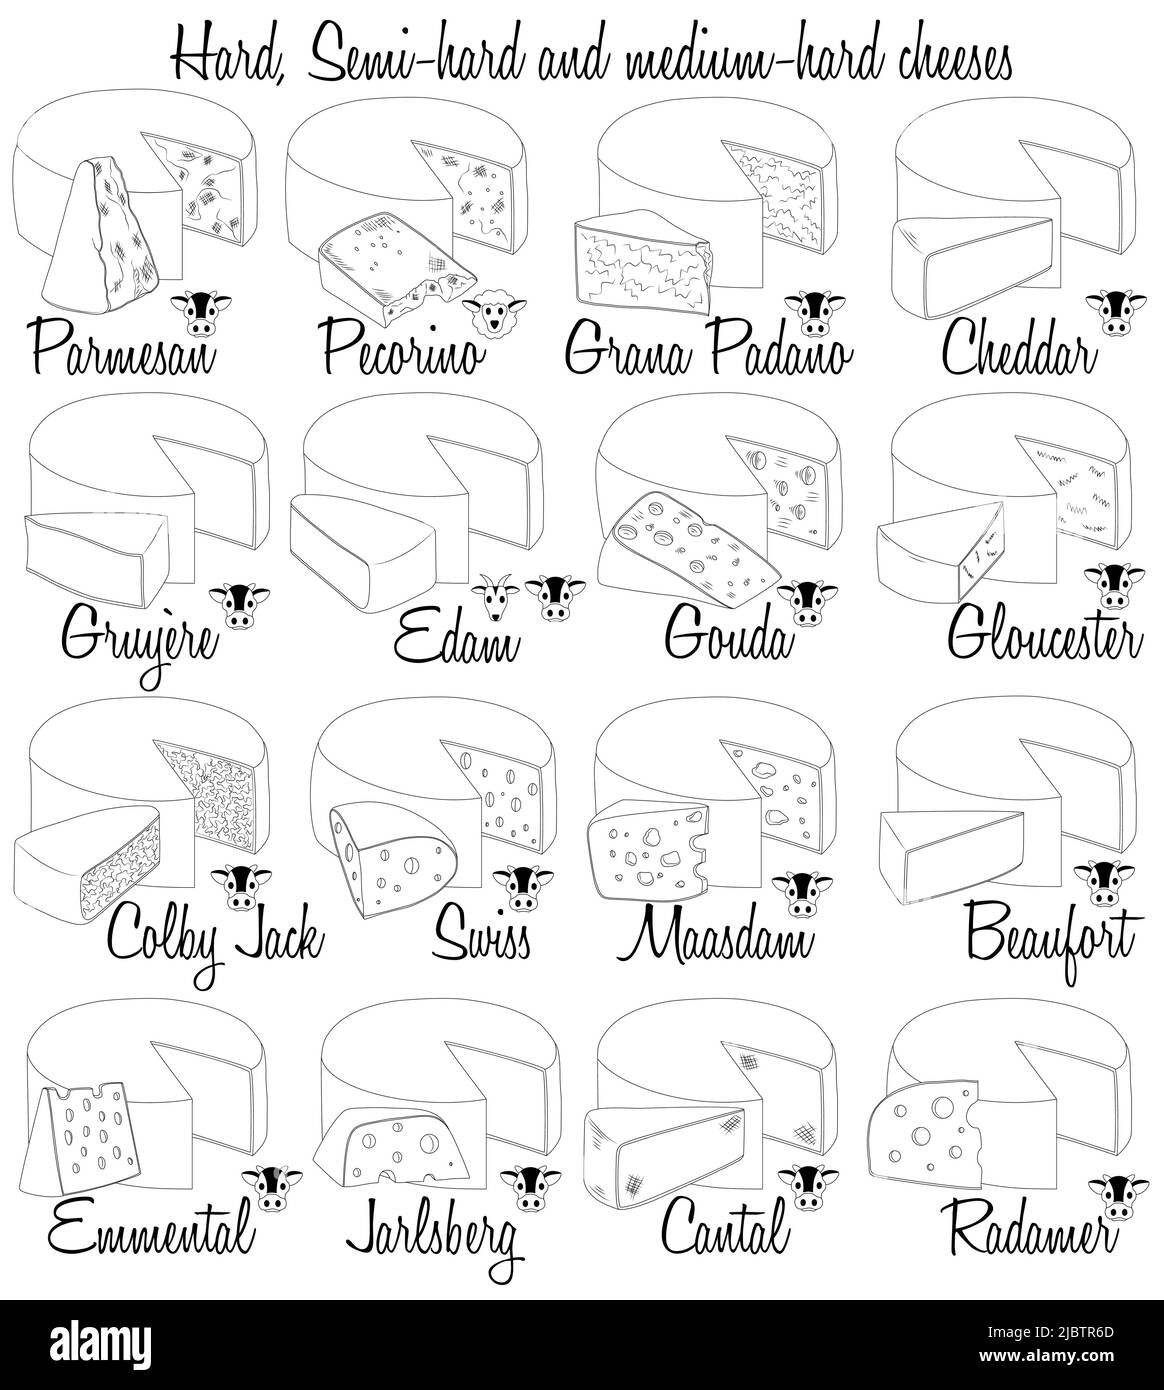 Hard, Semi-hard and medium-hard cheeses. Hand-drawn types of cheese with characteristics of each type. Stock Vector